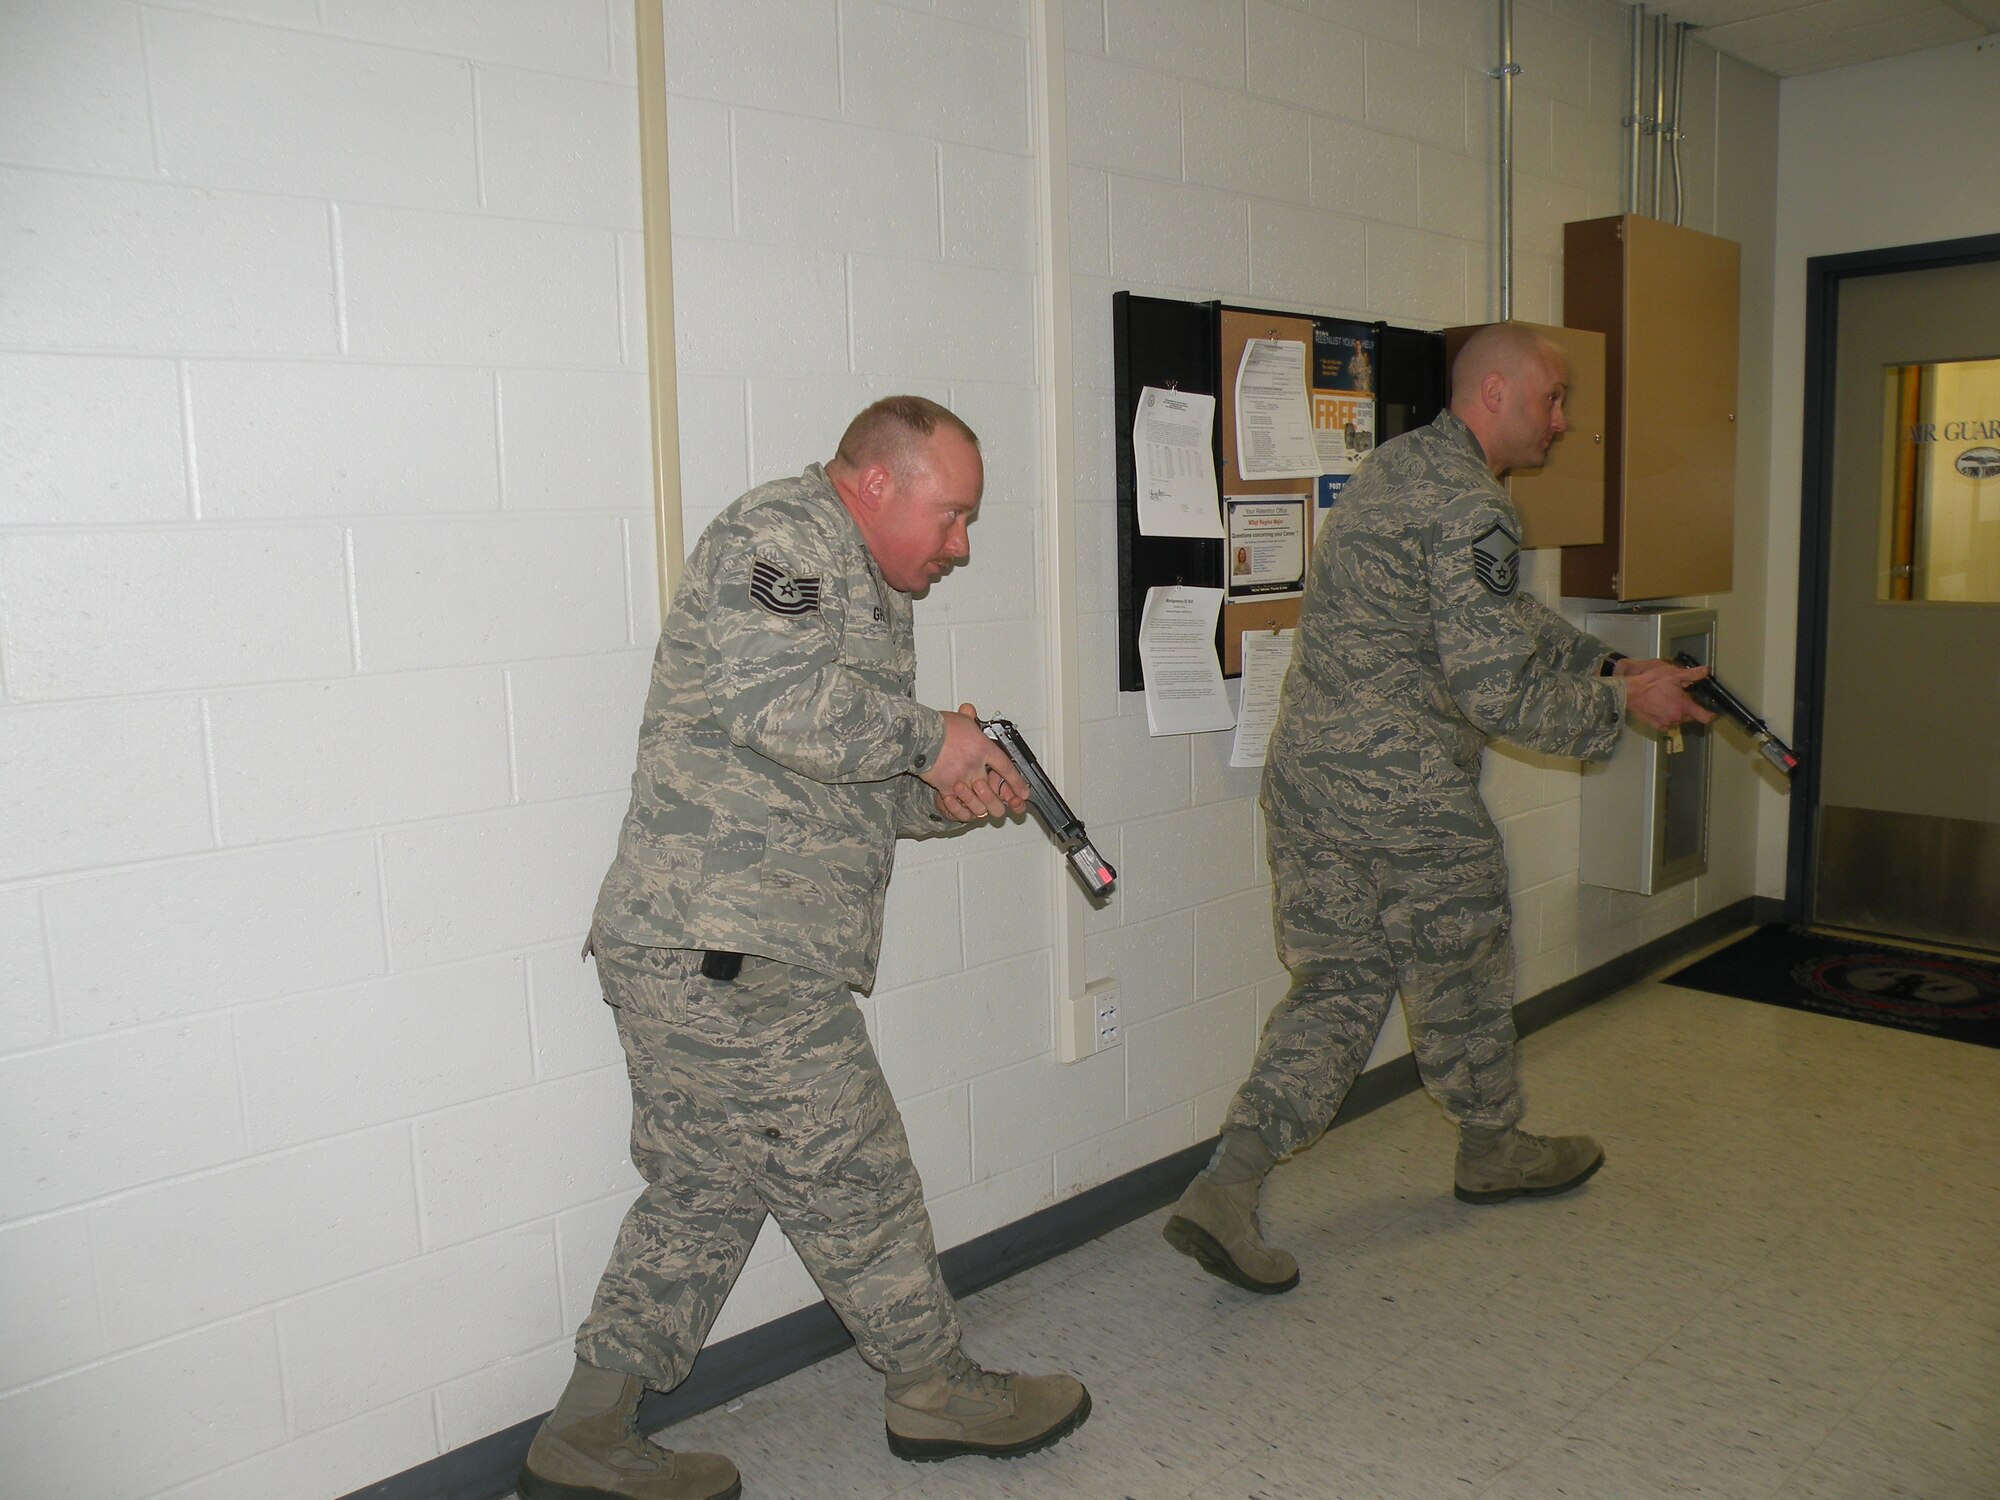 Tech. Sgt. Stephen Grippen and Master Sgt. Chris Redo of the 103rd Security Forces Squadron prepare to clear a room as part of a training exercise at Bradley Air National Guard Base, East Granby, Conn. in 2013. (Photos courtesy of Tech. Sgt. Jessica Roy)